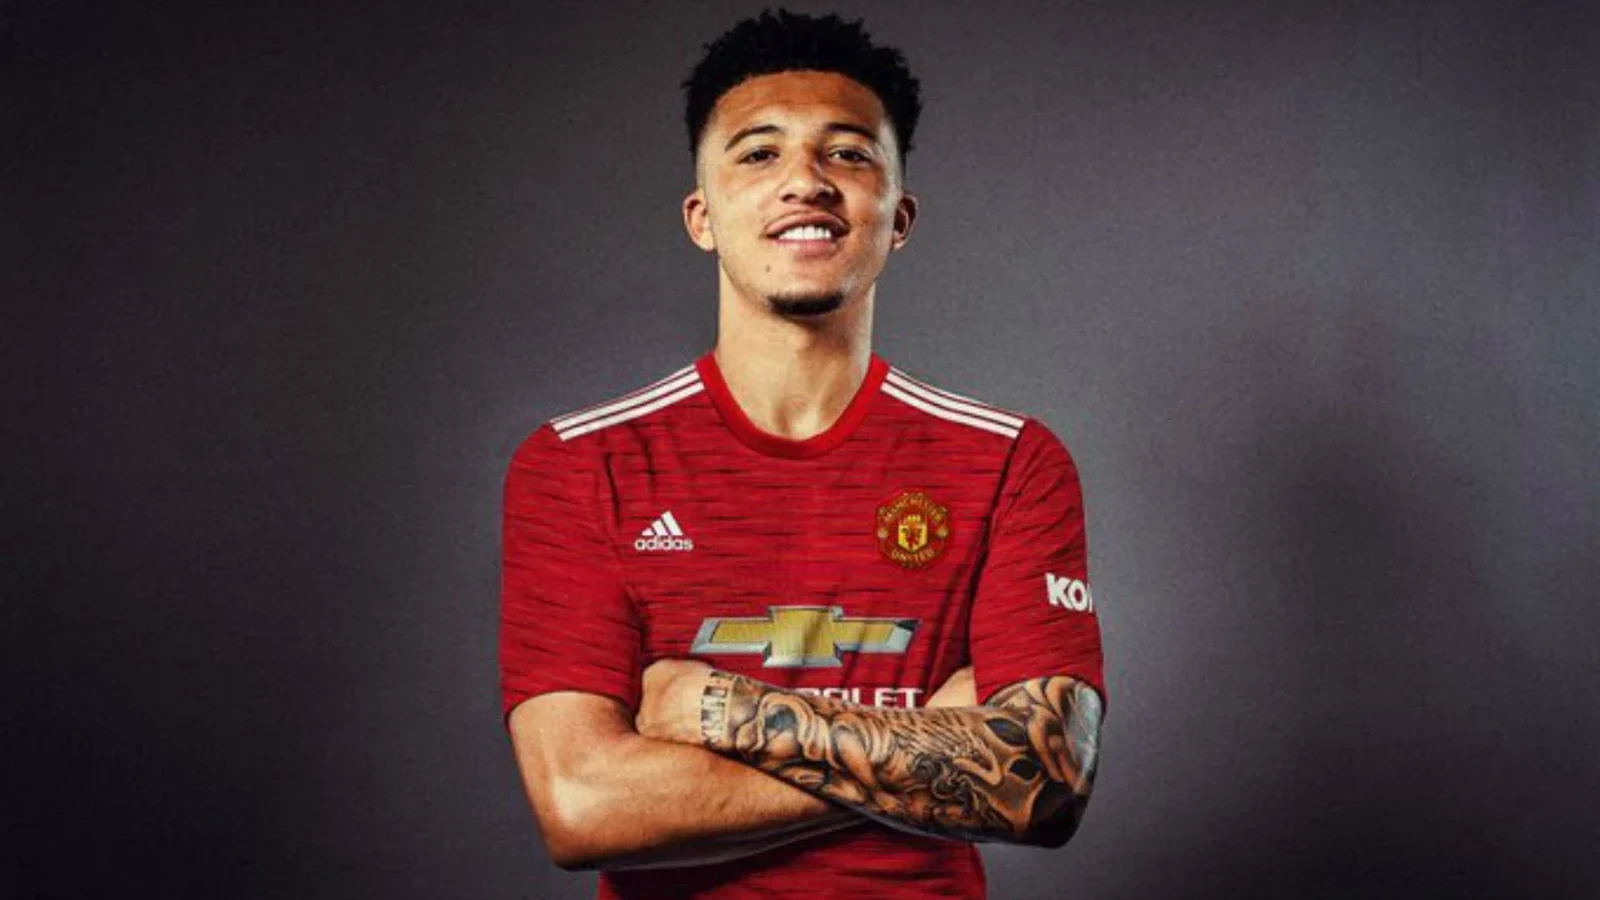 Greenwood is listed as a retained player for Man United in 202424.